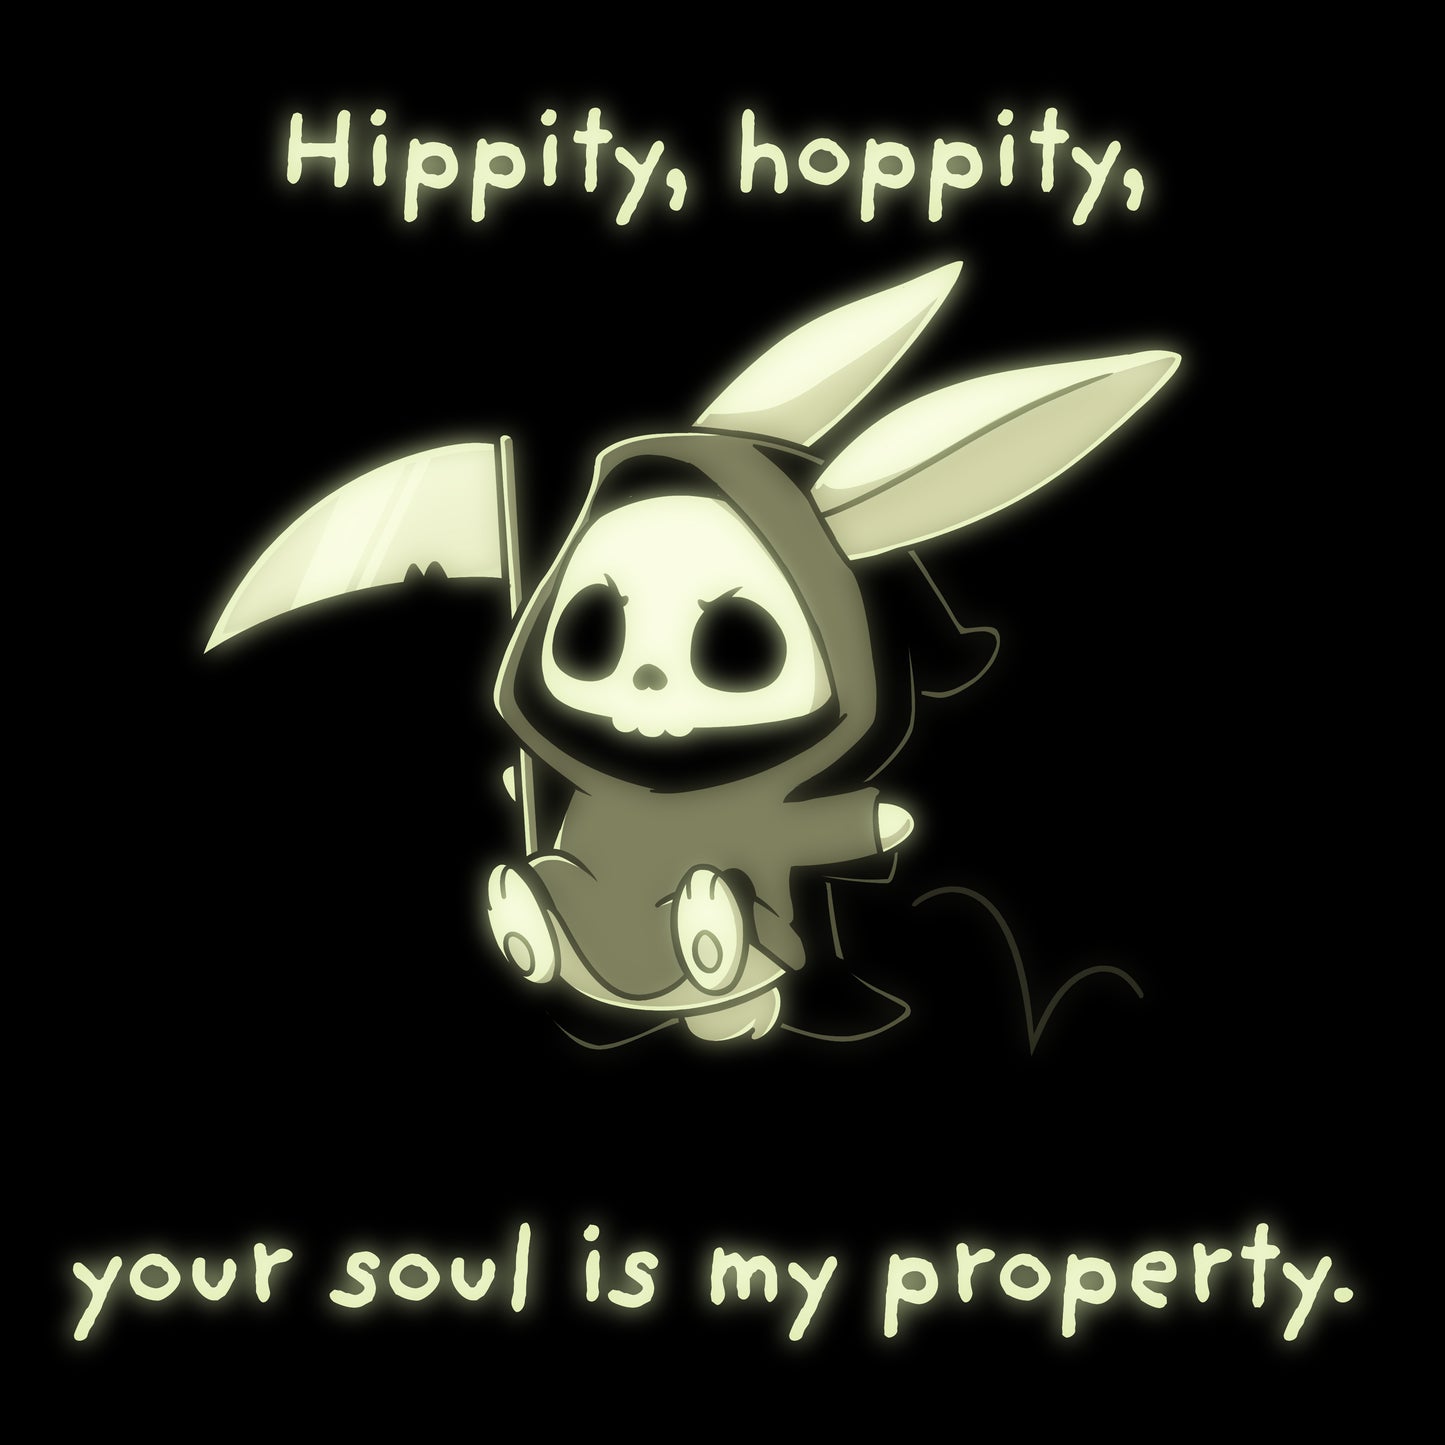 Super happy spooky Hippity Hoppity Your Soul is My Property (Glow) hops into your soul, claiming it as their property.